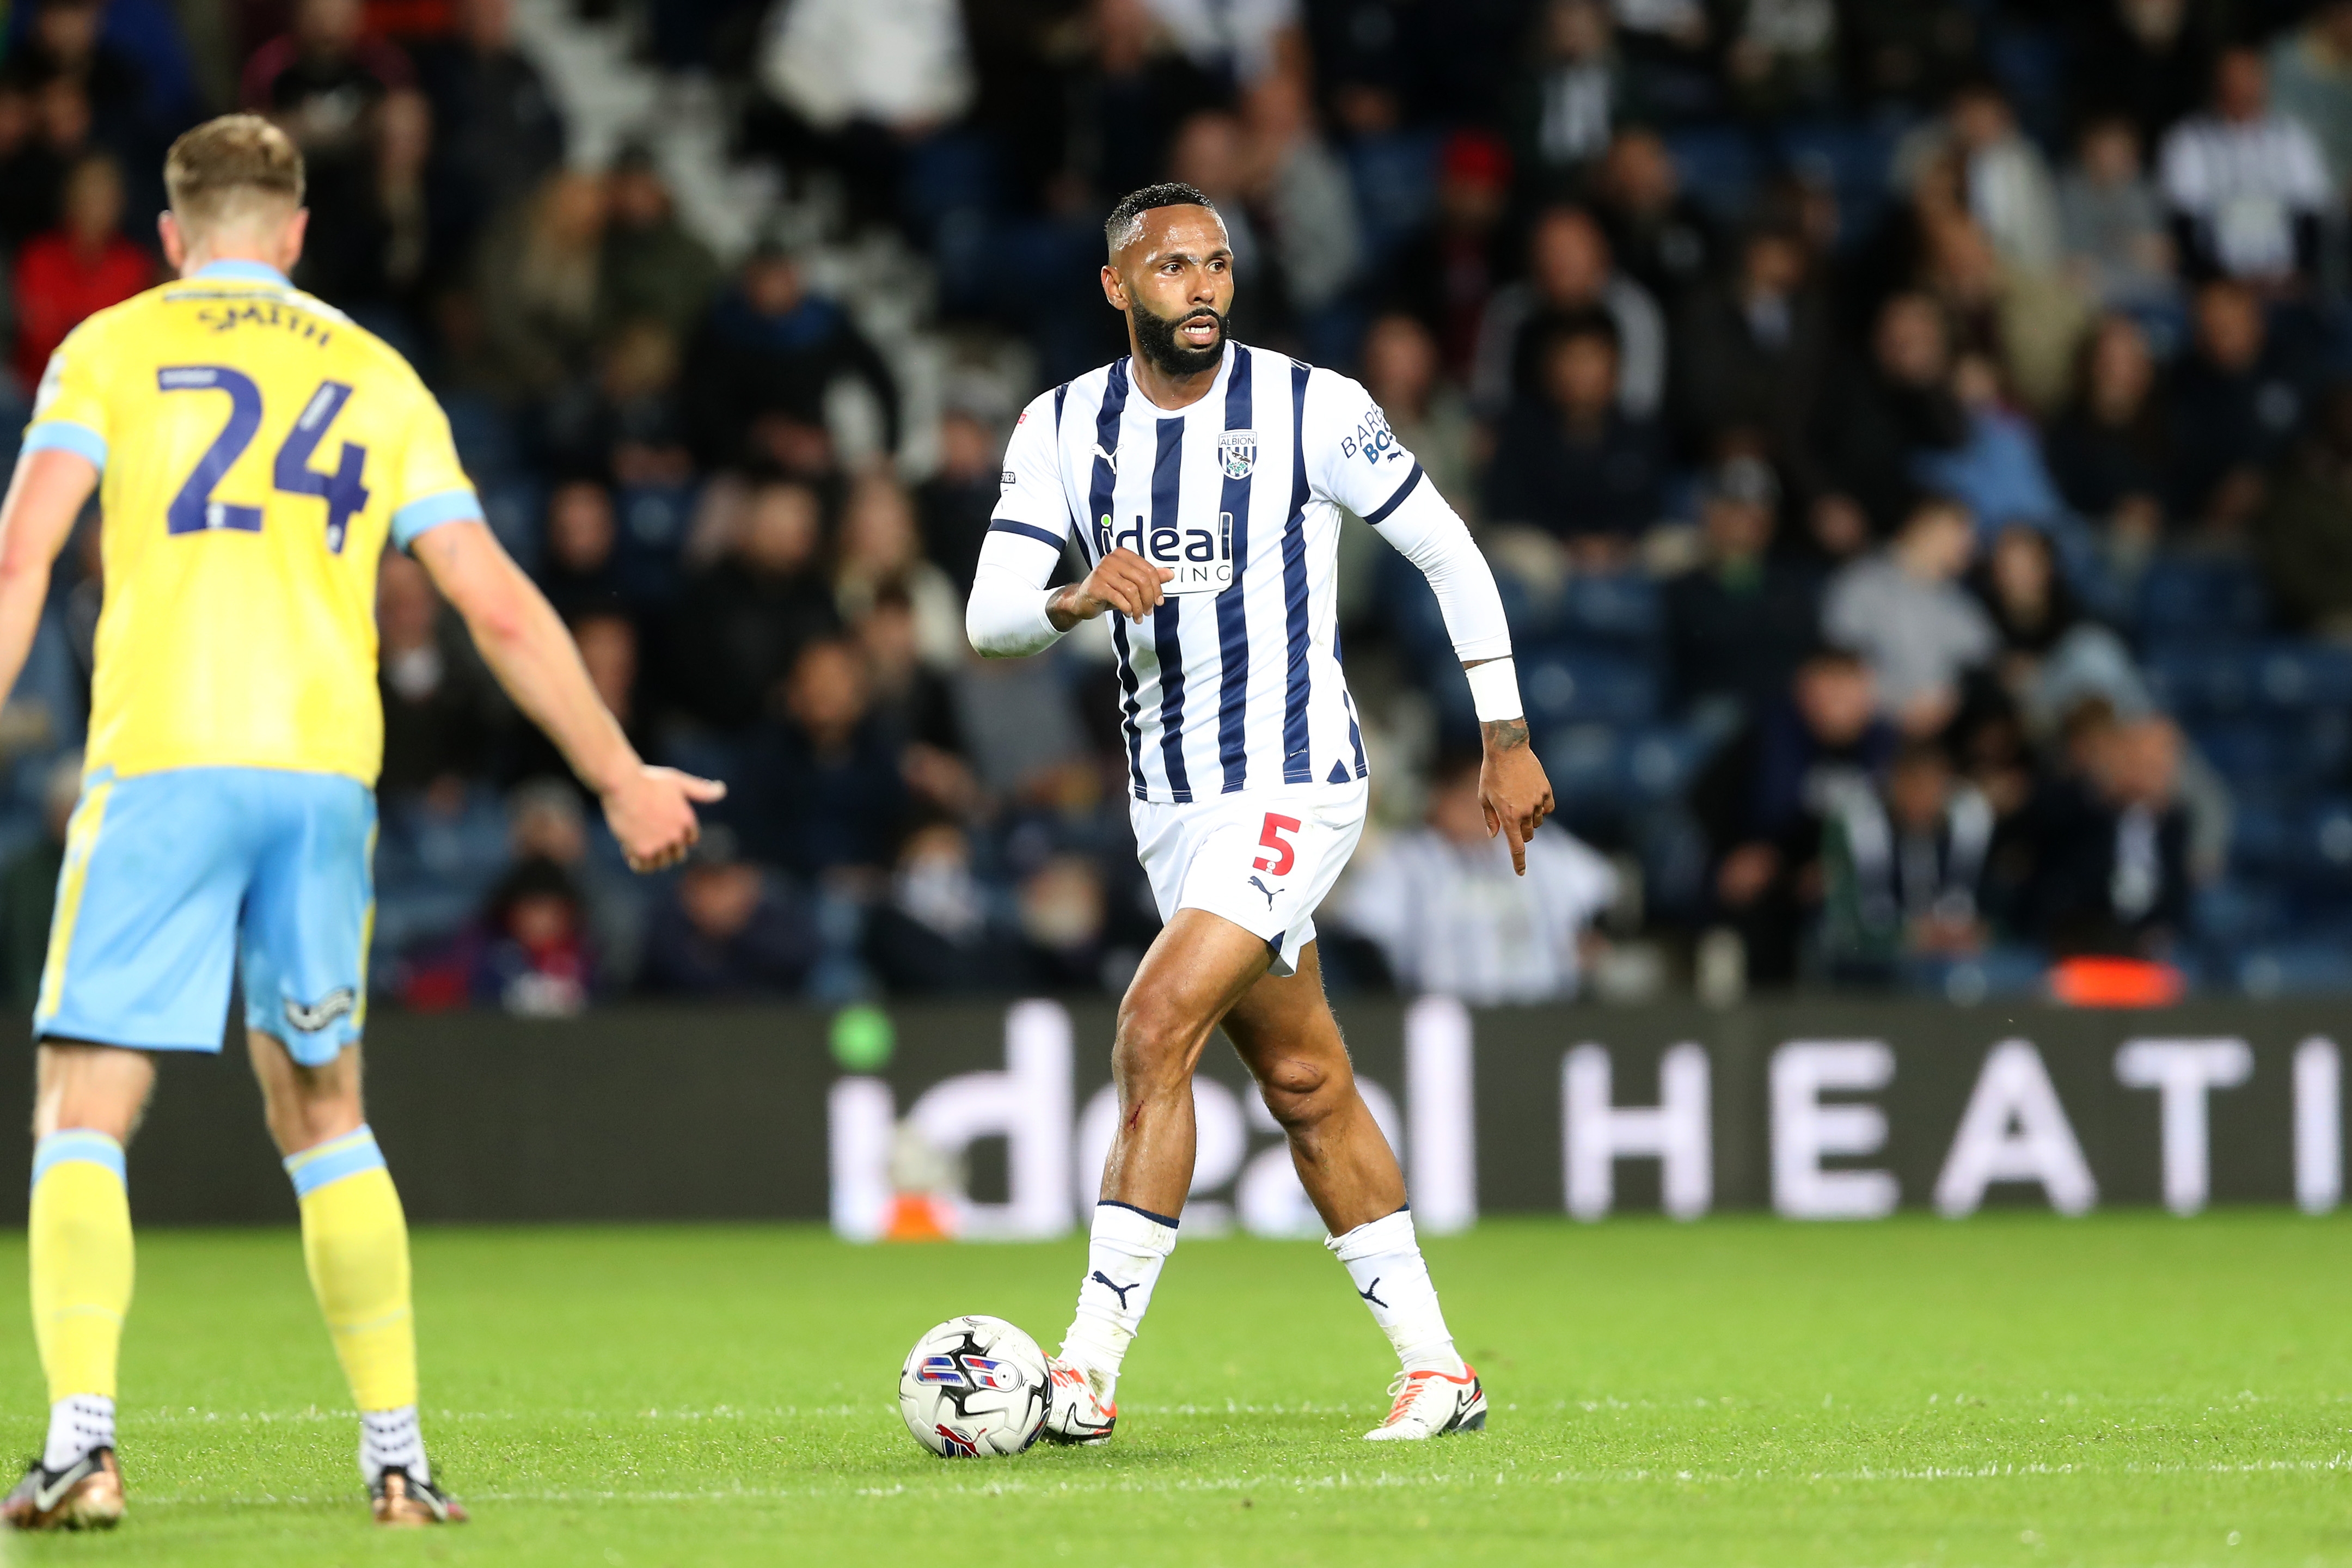 Kyle Bartley on the ball against Sheffield Wednesday